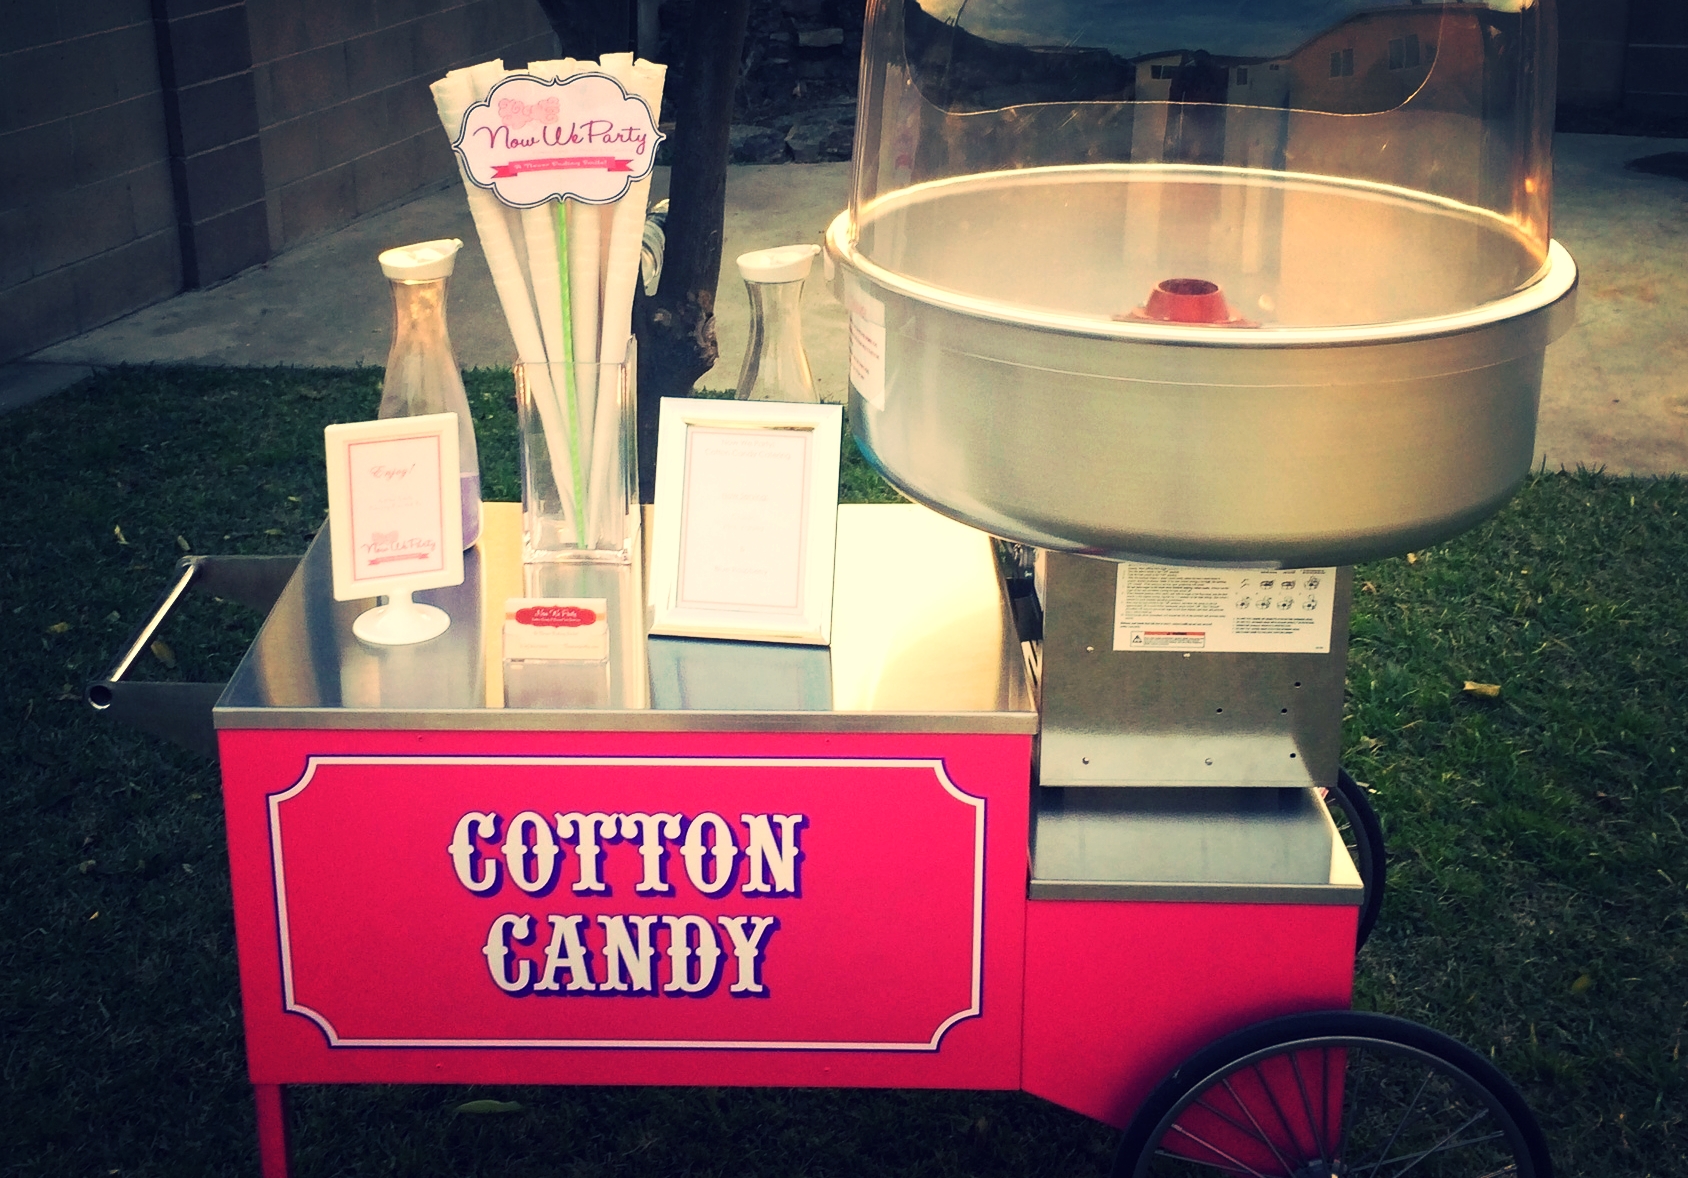 Gourmet Cotton Candy & Specialty Slushies